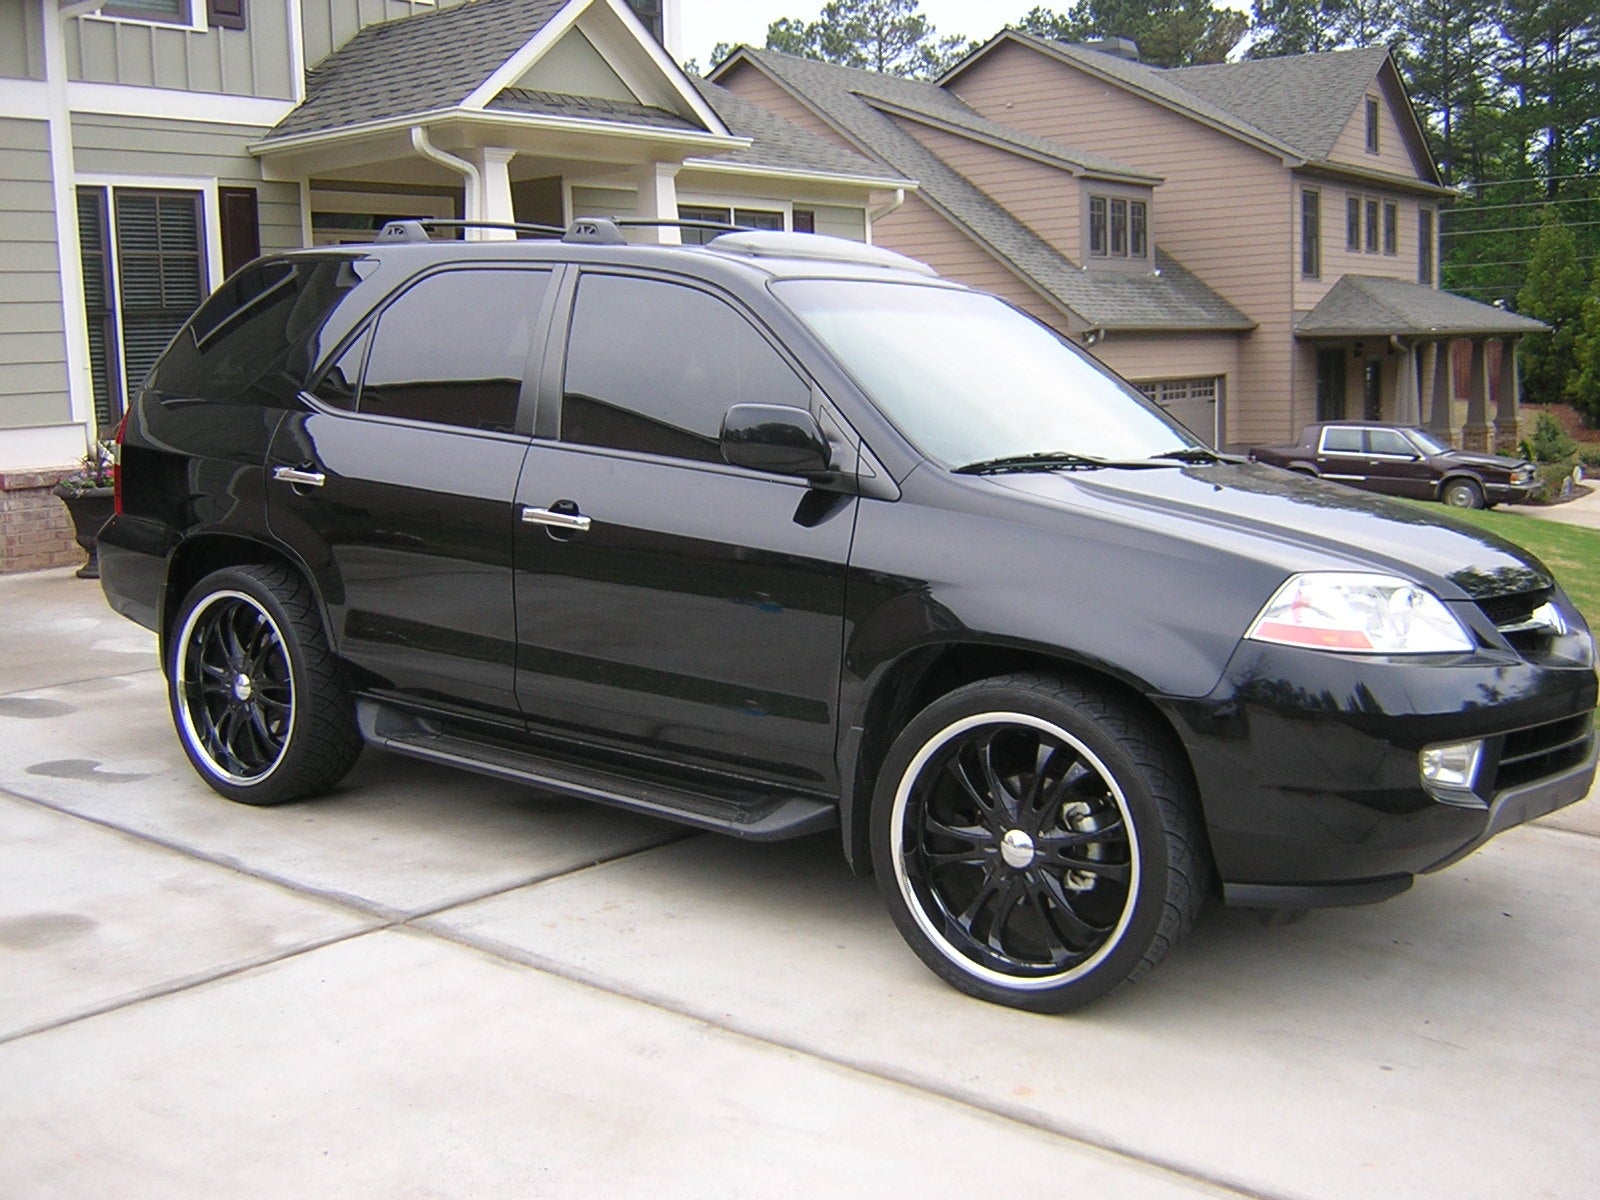 2002 Acura MDX - Pictures - 2002 Acura MDX Touring picture ...